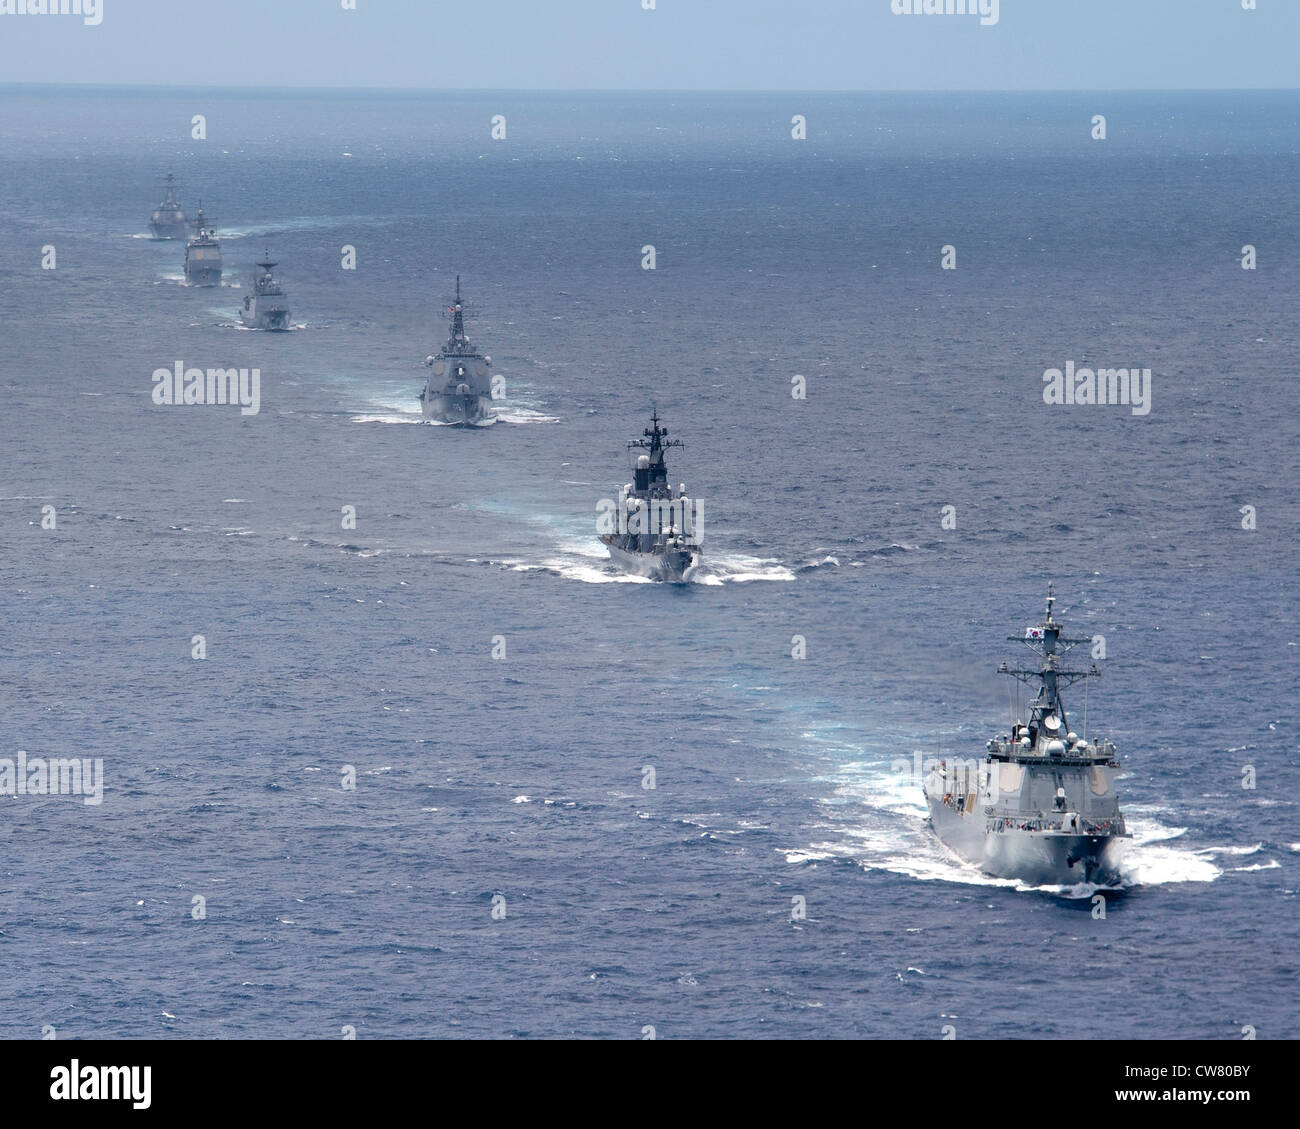 A formation of ships from the U.S. Navy, U.S. Coast Guard, Japan Maritime Self-Defense Force, and the Republic of Korea Navy maneuver in the Pacific Ocean during a trilateral exercise (TRILATEX). TRILATEX is intended to increase interoperability, operational proficiency and readiness between partnering nations. The ships included The guided missile destroyer USS Chafee (DDG 90), the guided missile cruiser USS Port Royal (CG 73), USCGC Galveston Island (WPB 1349), JS Moyoko (DD 175), JS Shirane (DDH 143), ROKS Yulgok Yi I (DDG 992) and ROKS Choi Young (DDH 981). Stock Photo